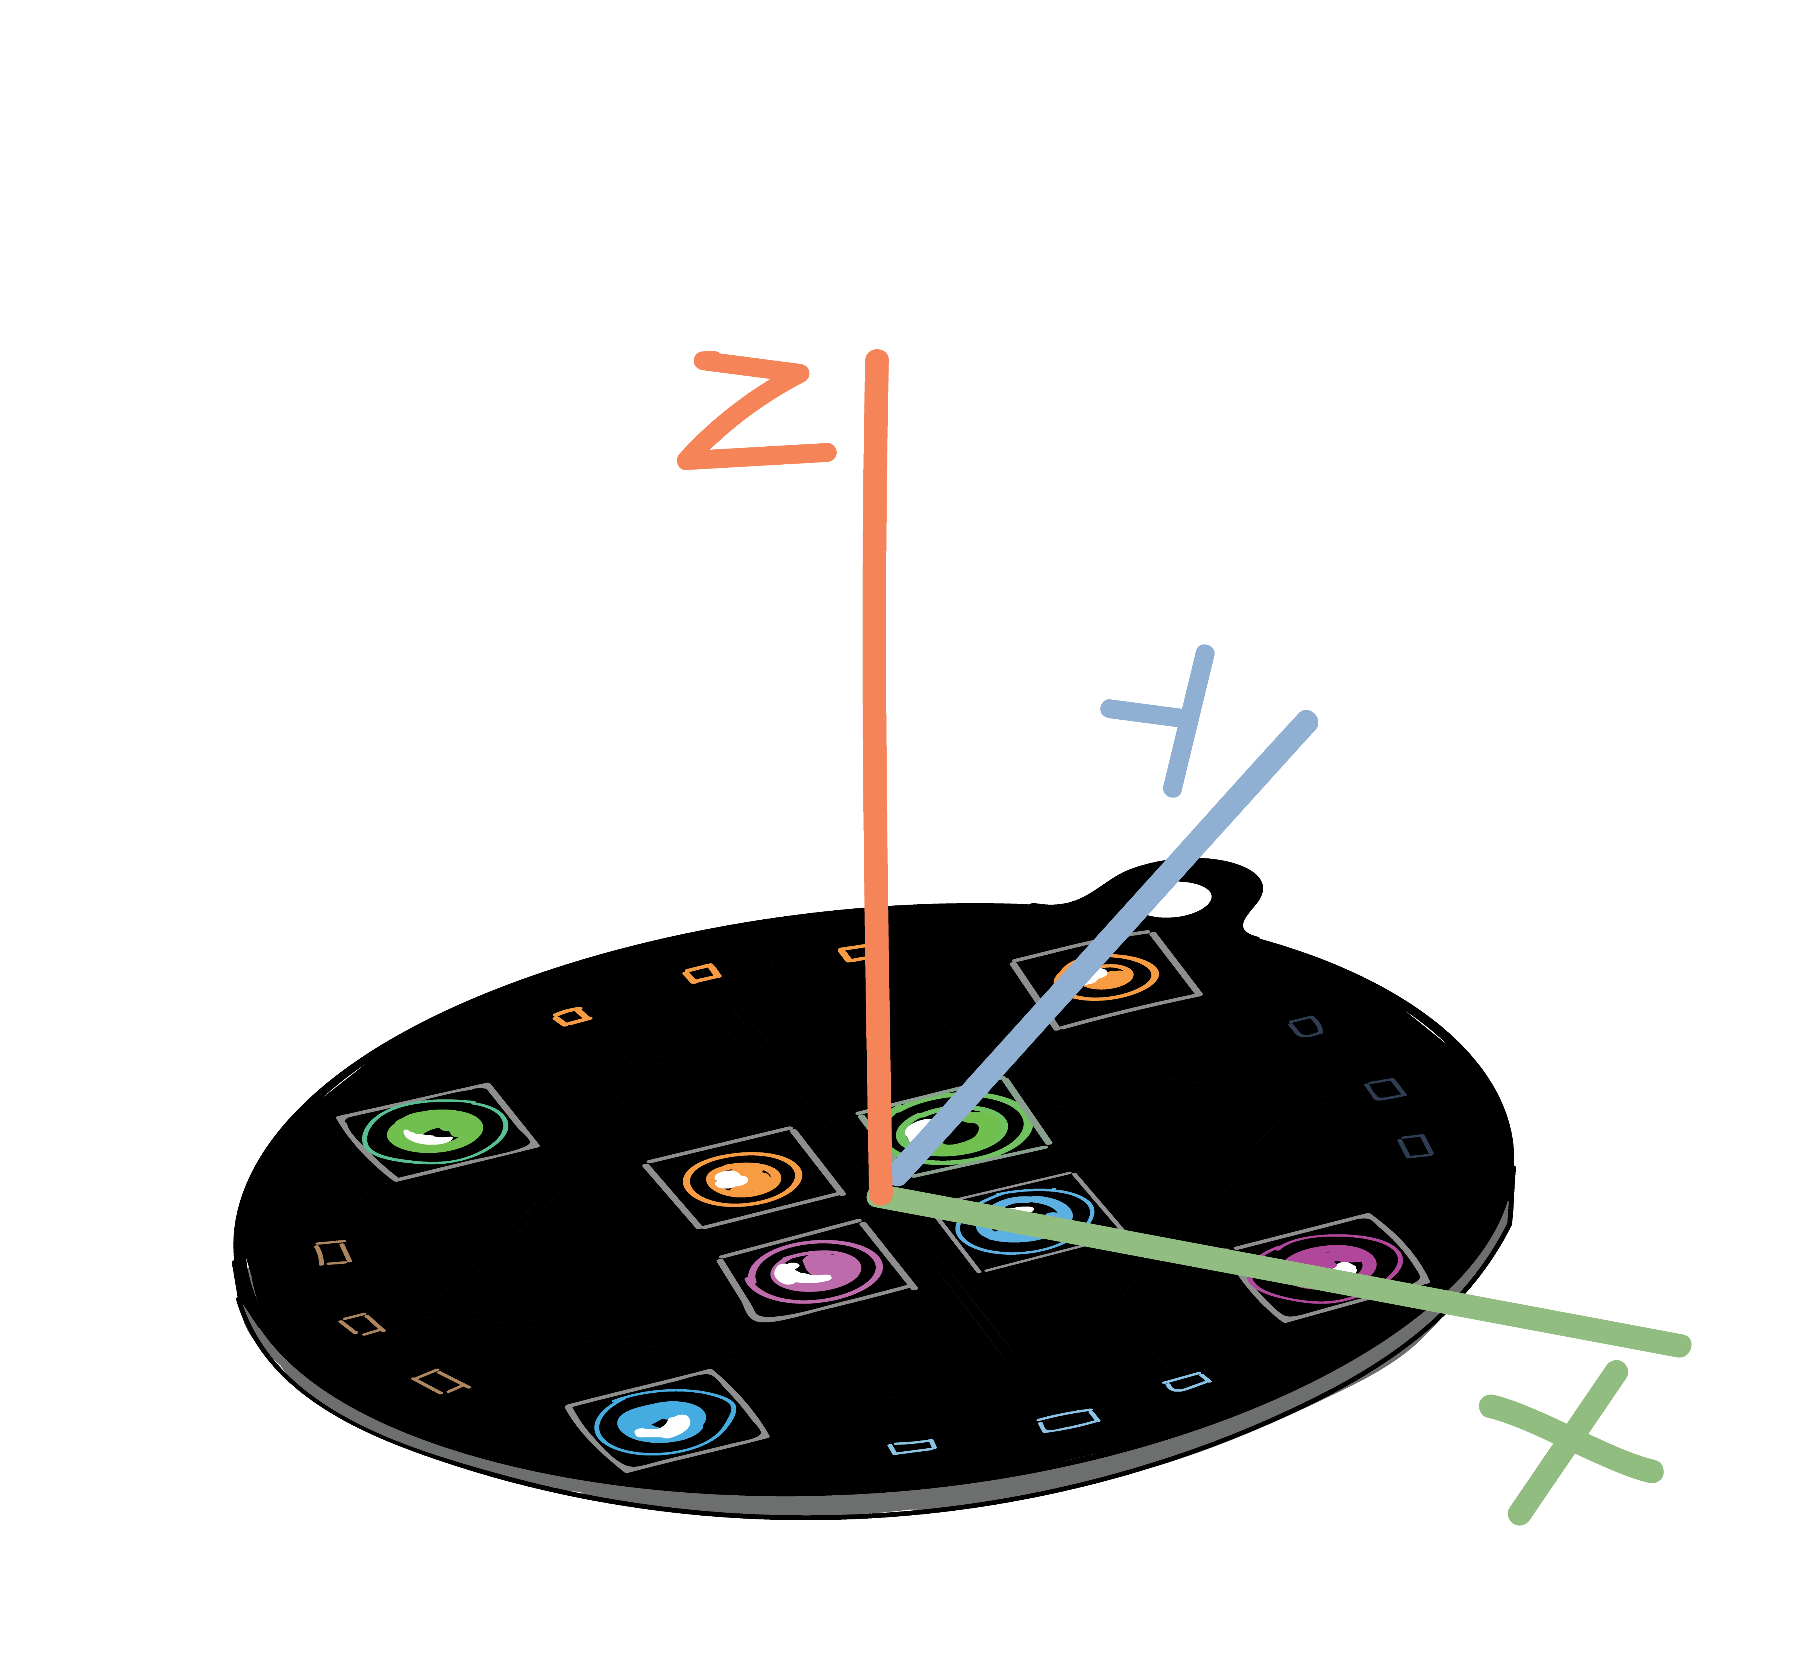 These are the three axes that the SpinWheel can detect acceleration and gravity along. In the interactive 3D diagram you can see how the vector of gravitational acceleration (in grey) is decomposed along these three axes. You can drag, ctrl+drag, or scroll on the 3D image to rotate, pan, or zoom the camera.image credit Mariya Krastanova